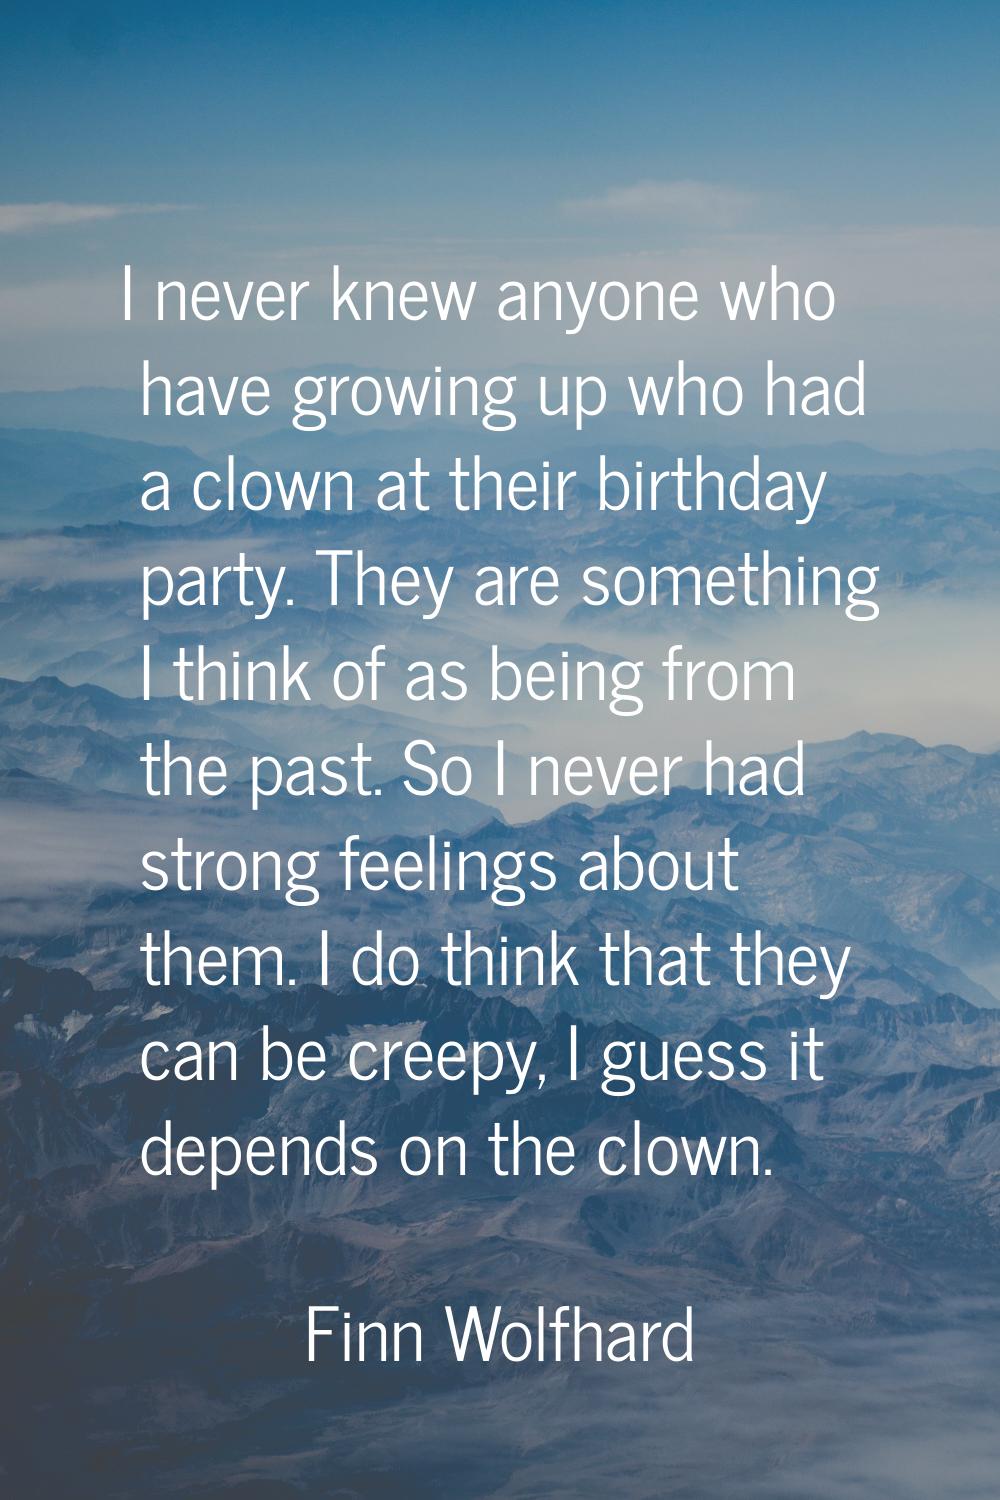 I never knew anyone who have growing up who had a clown at their birthday party. They are something